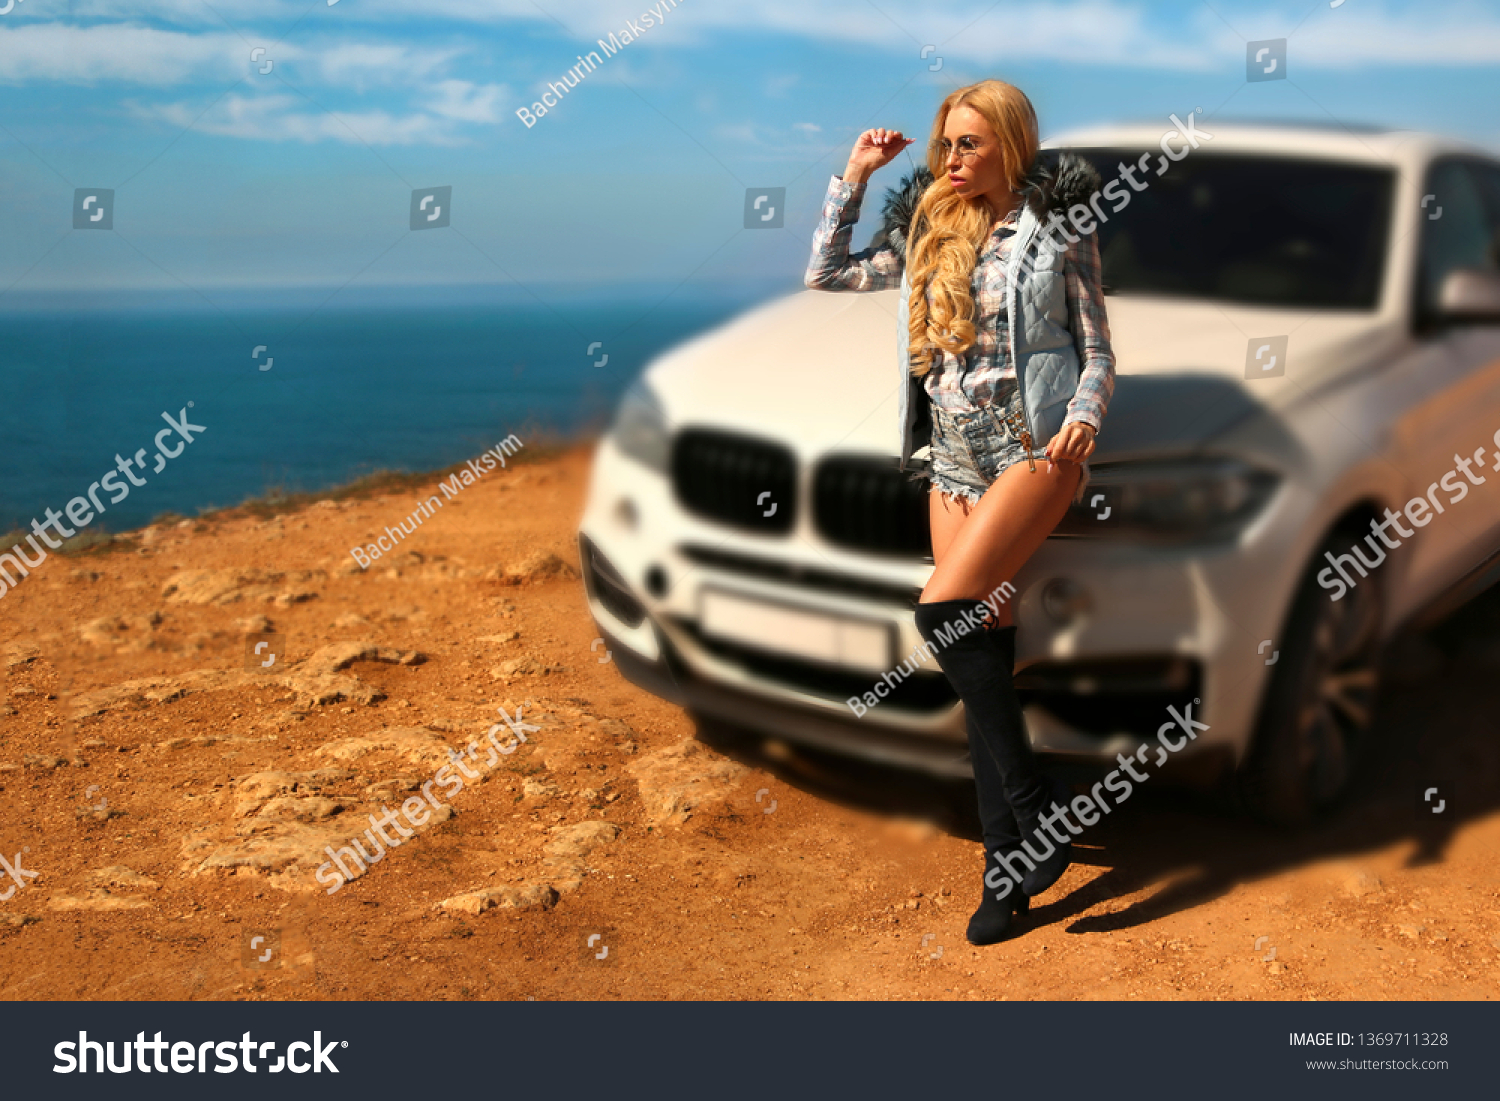 Bmw, sexually, car, sexy, woman, female, auto, automobile, girl, automobile, model, sexy, blonde, nature, fashion, style, relax, mood, emotions, travel, luxury, rich #1369711328